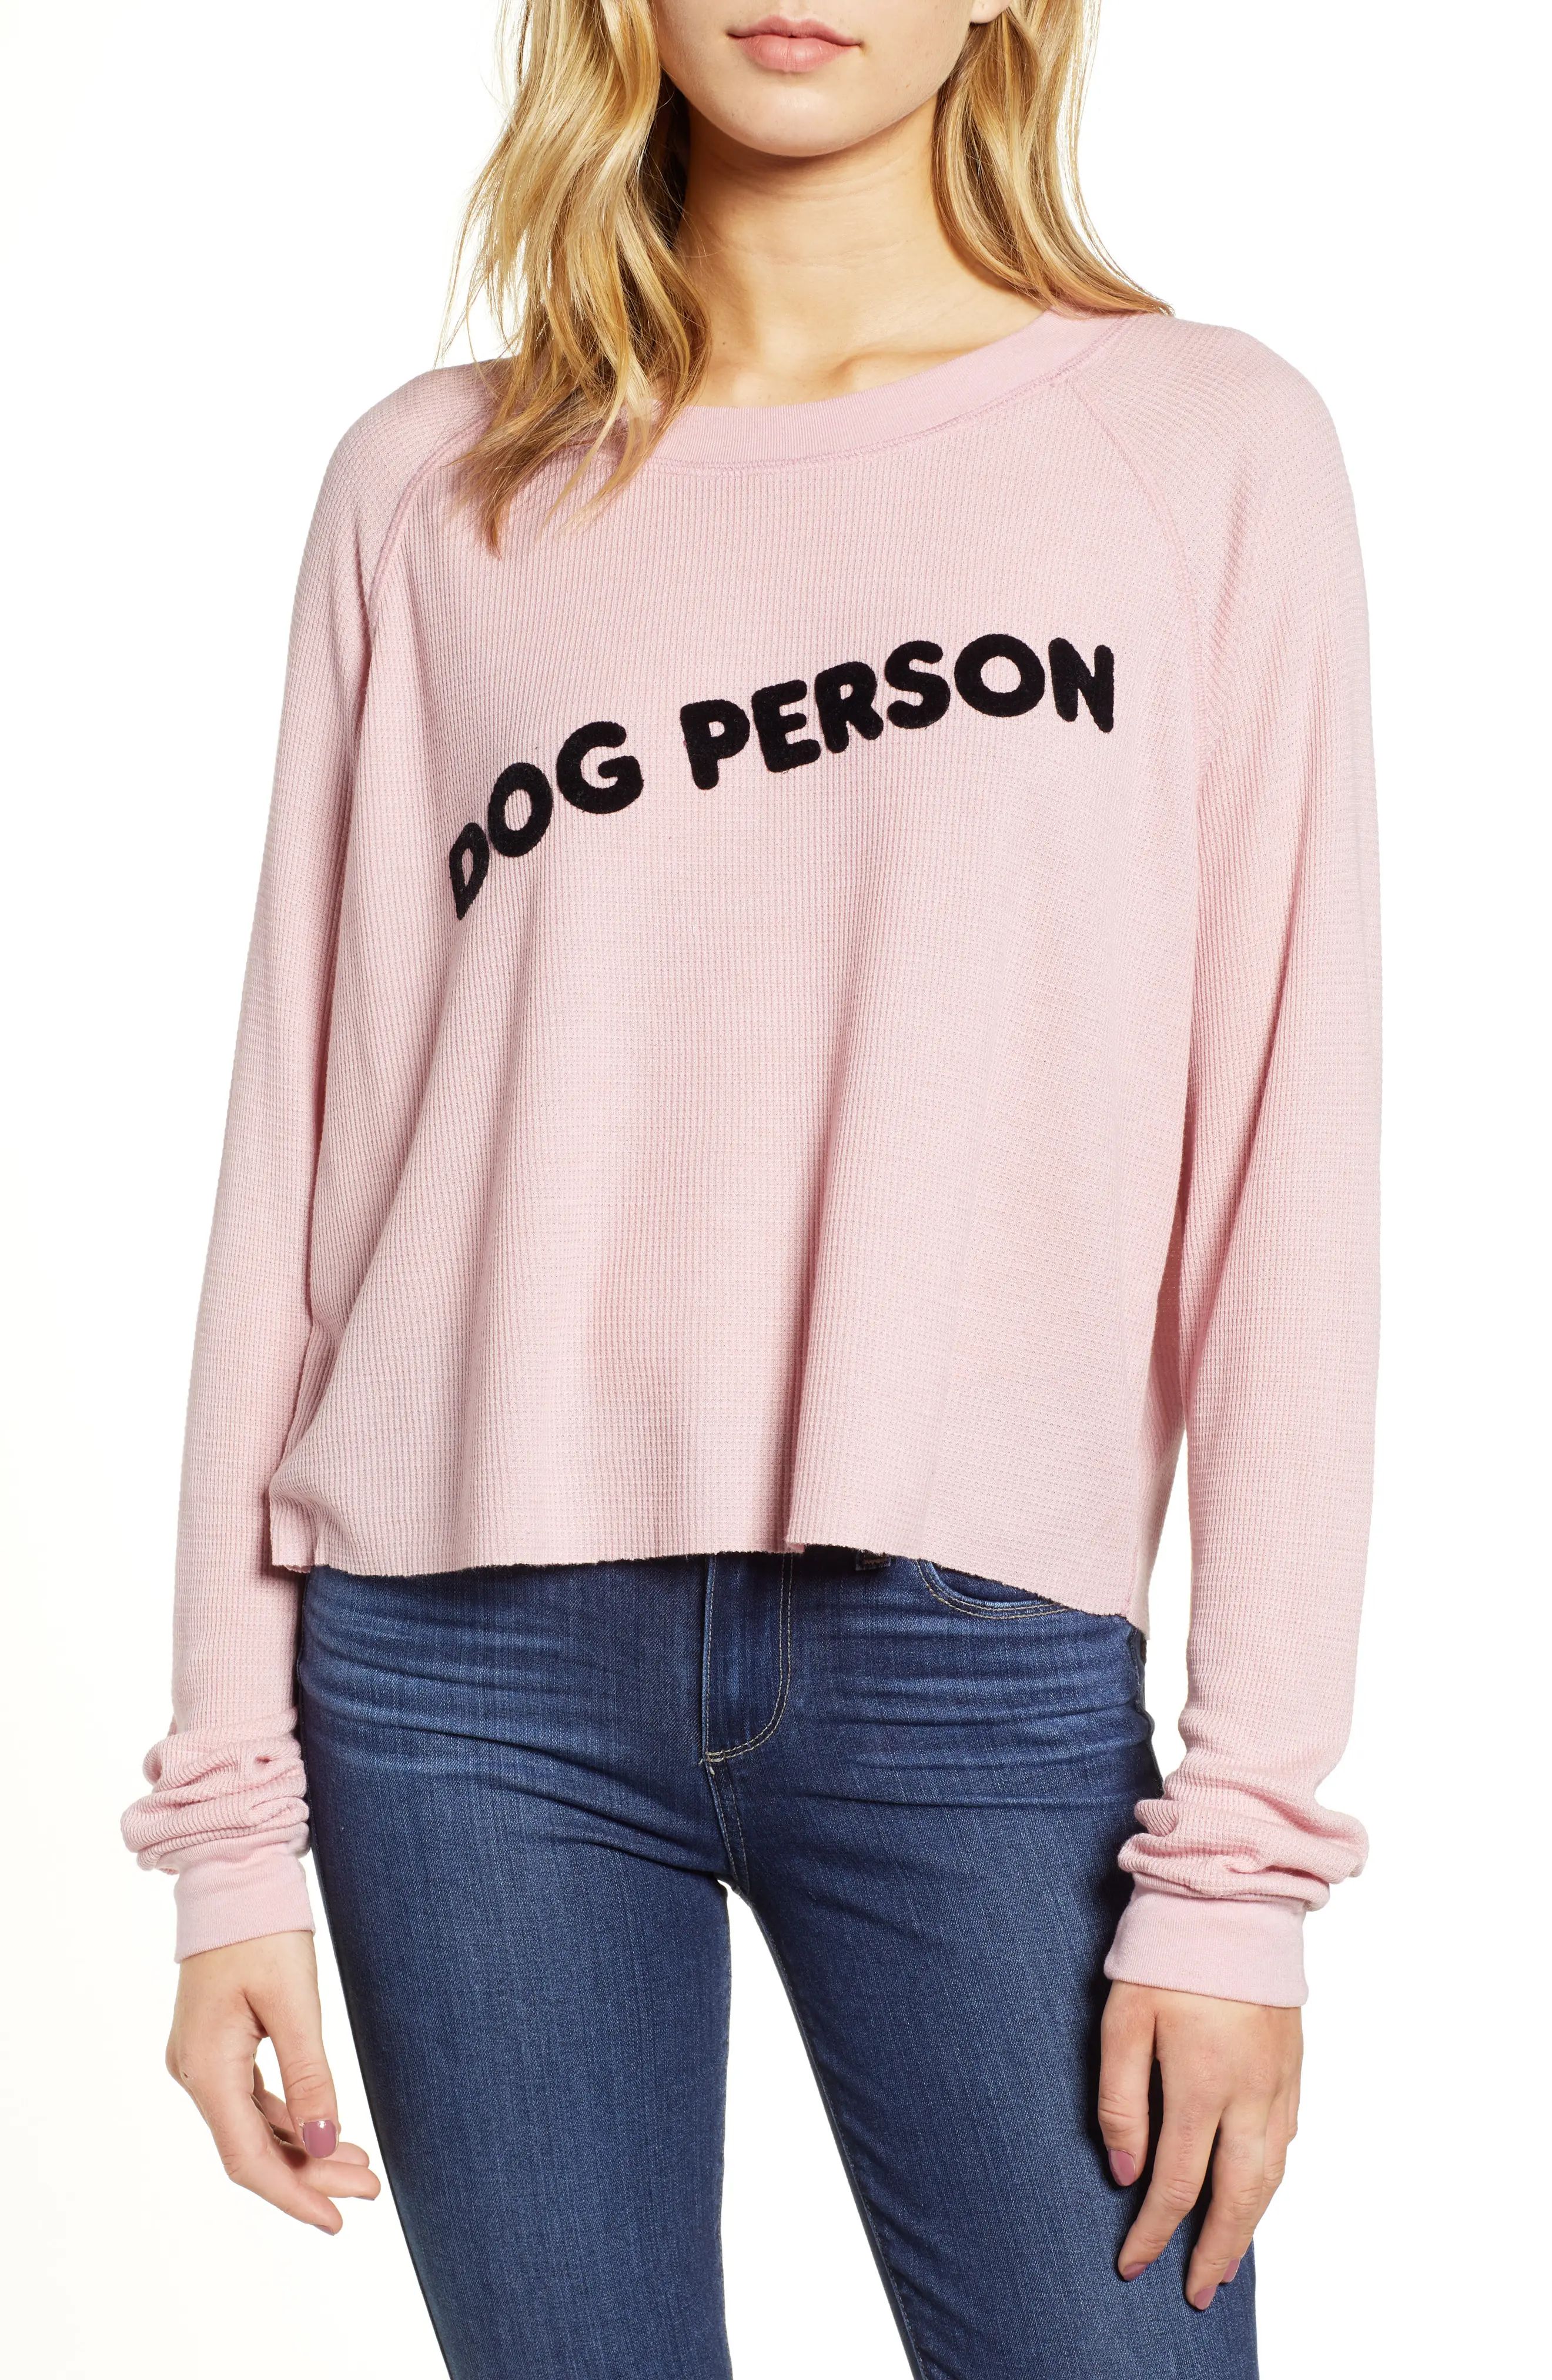 Wildfox Monte Dog Person Thermal Top | Nordstrom